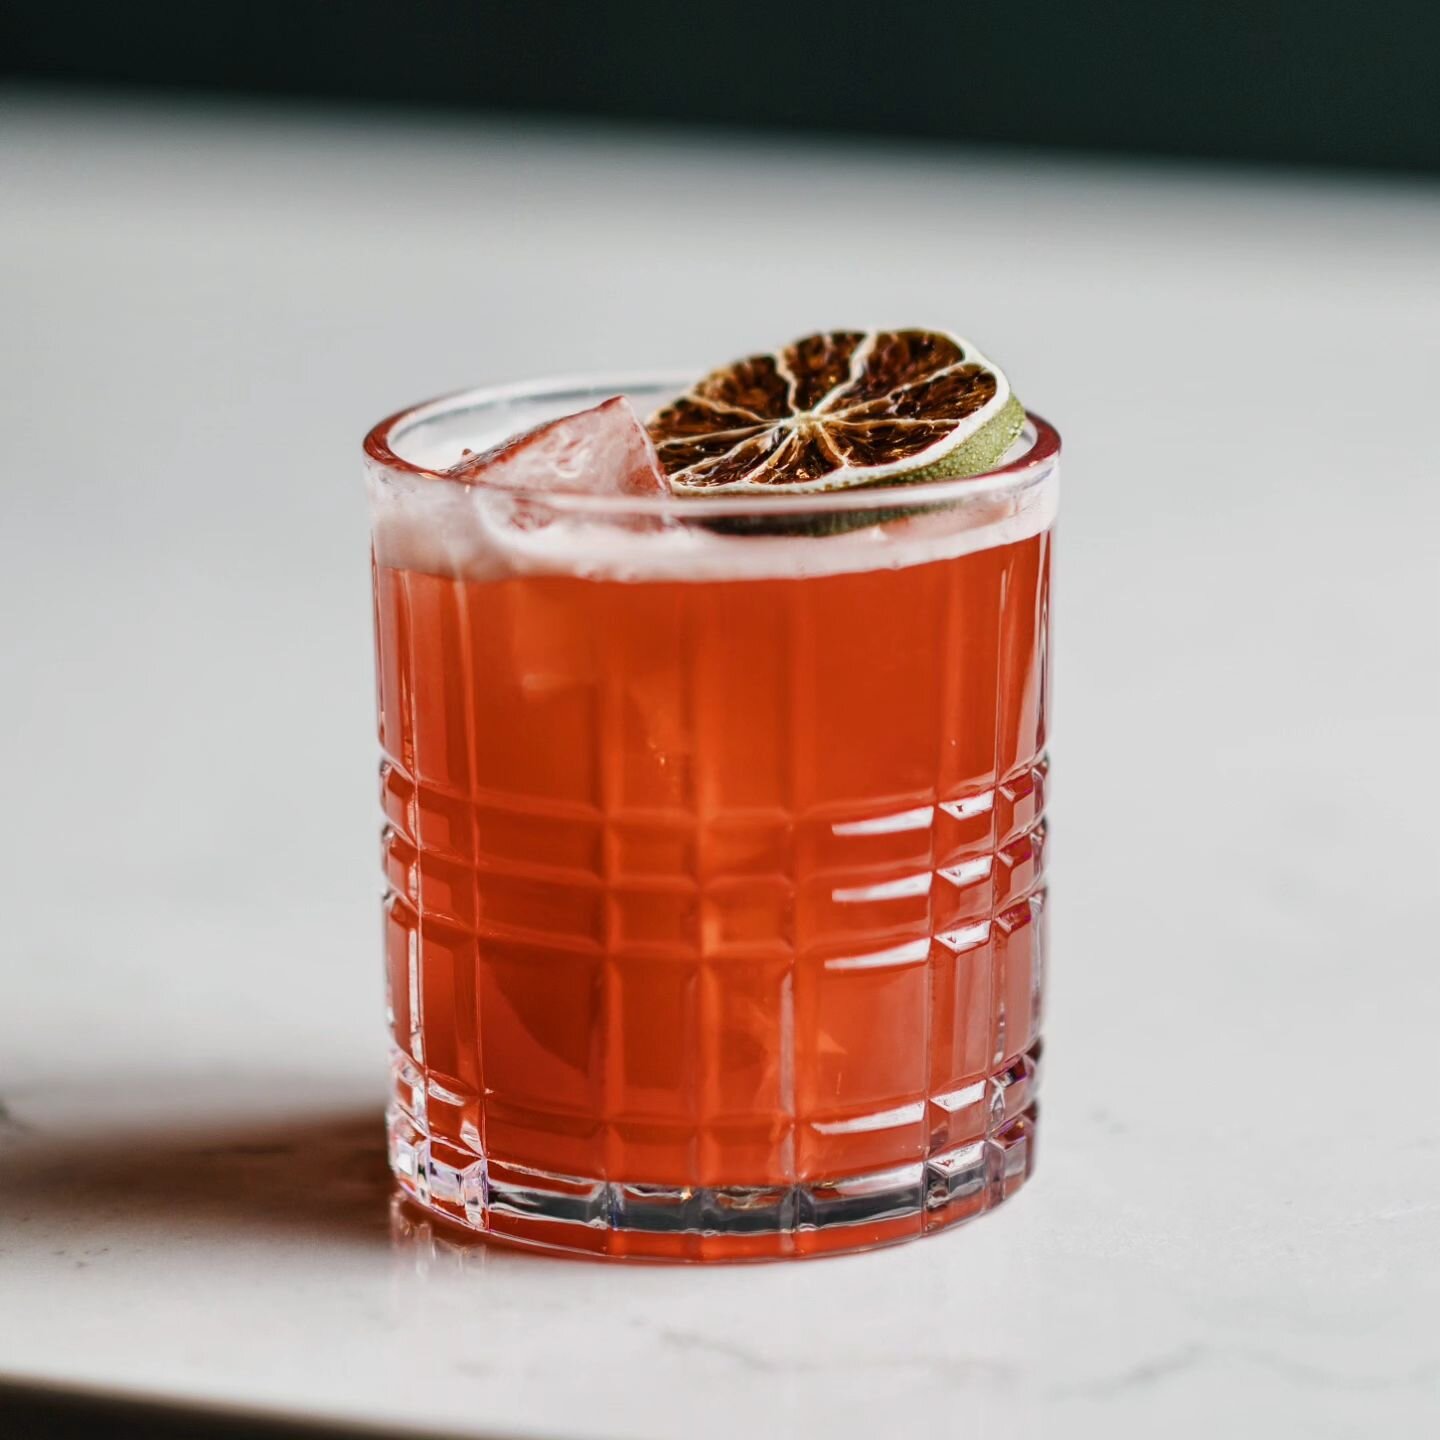 Let's throw some fire on your Wednesday with a Mexican Firing Squad. This crowd pleaser is exactly what you need. Grab a few of your own when doors open at 4pm. {lime, grenadine, angostura, silver tequila}